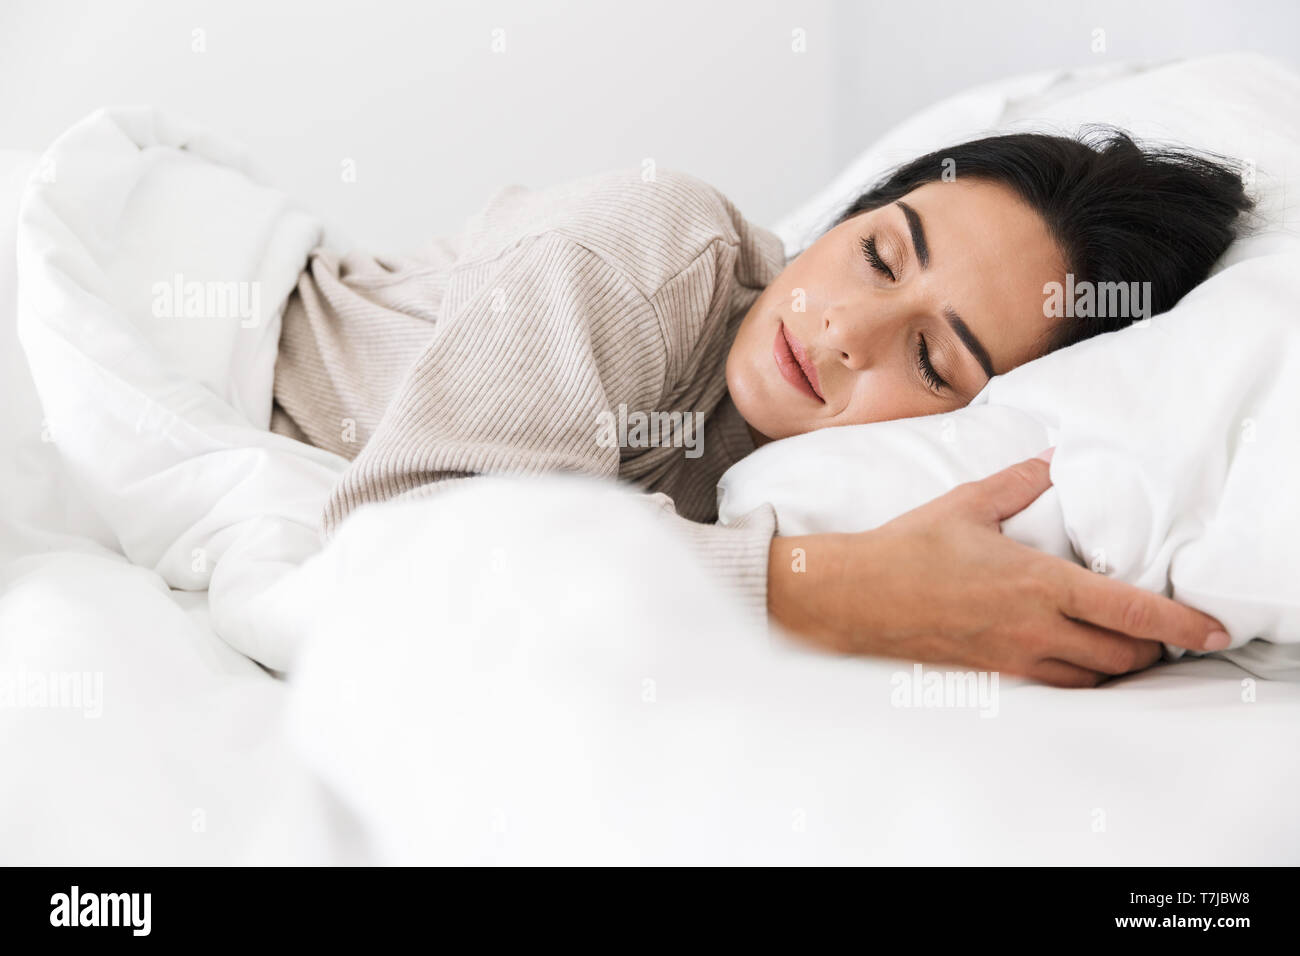 Photo of middle-aged woman 30s sleeping while lying in bed with white linen at home Stock Photo